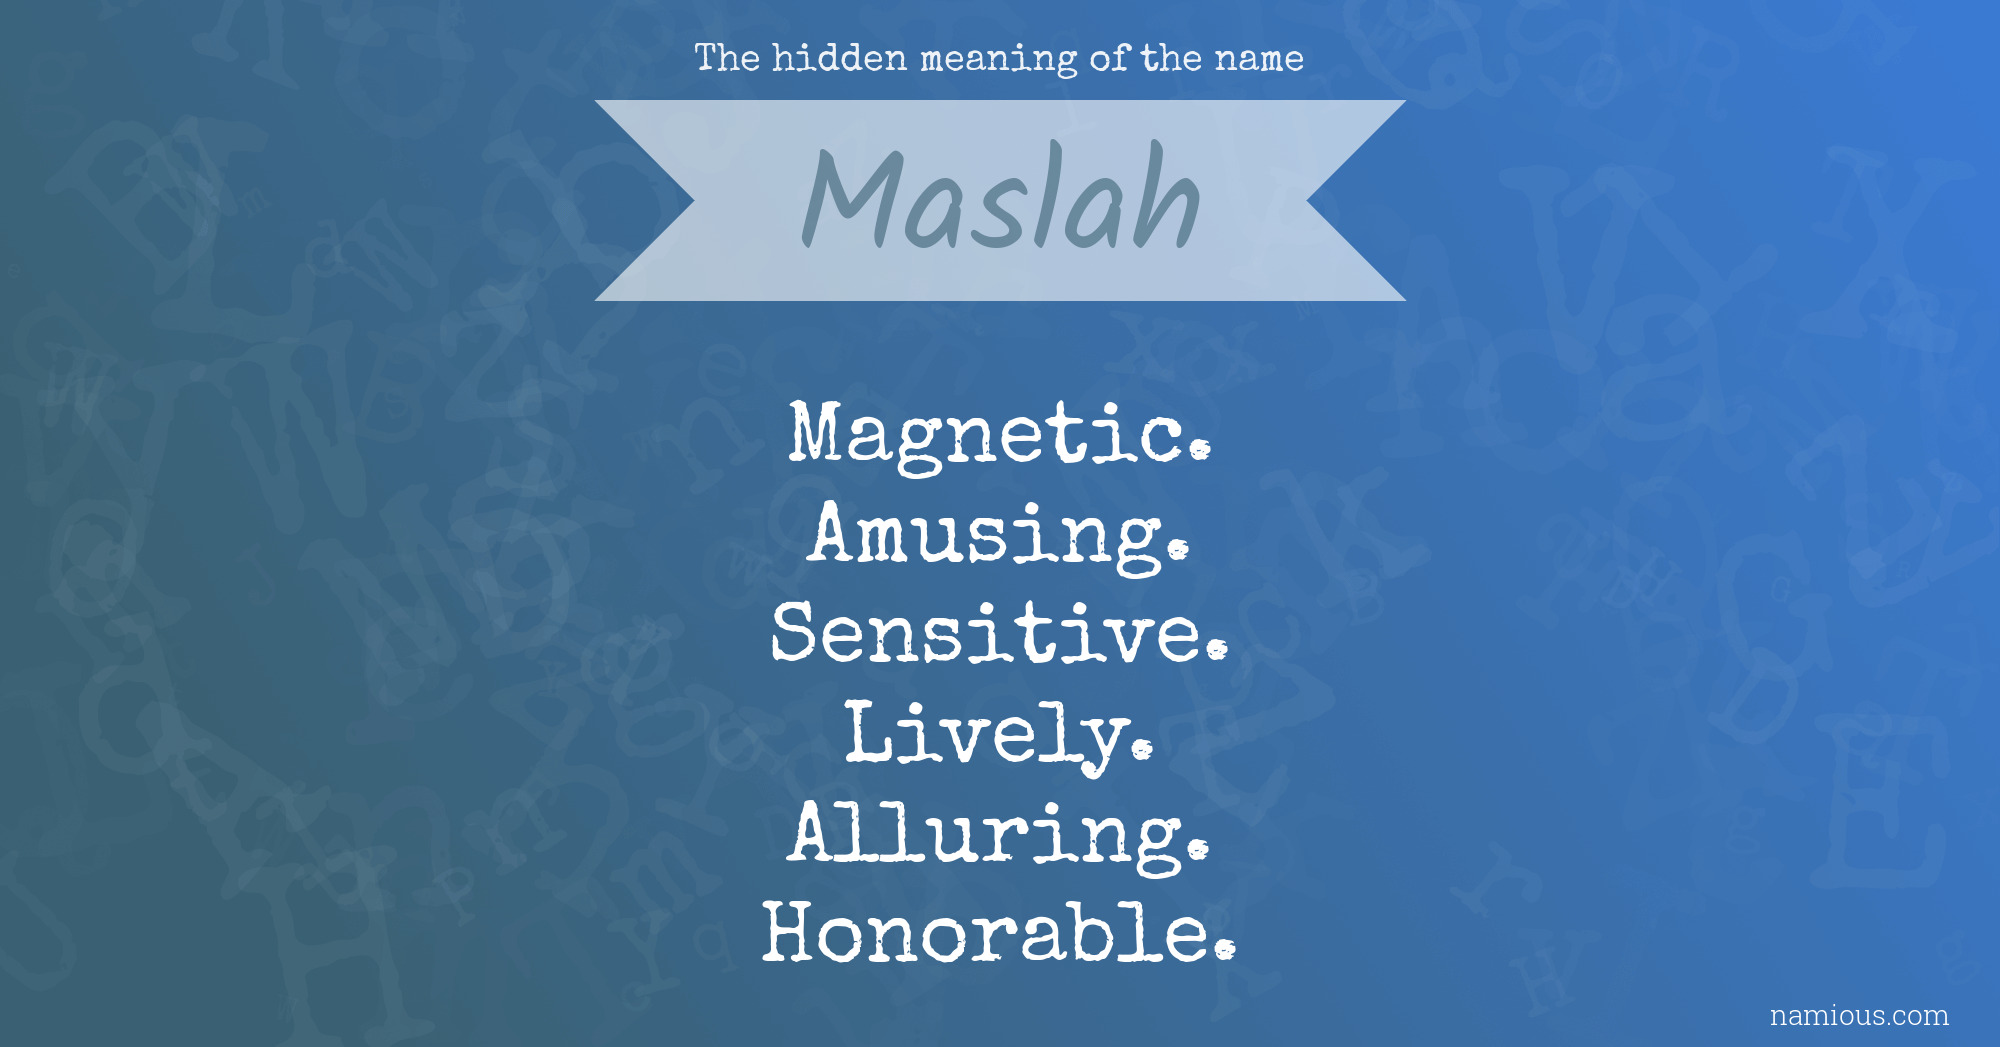 The hidden meaning of the name Maslah